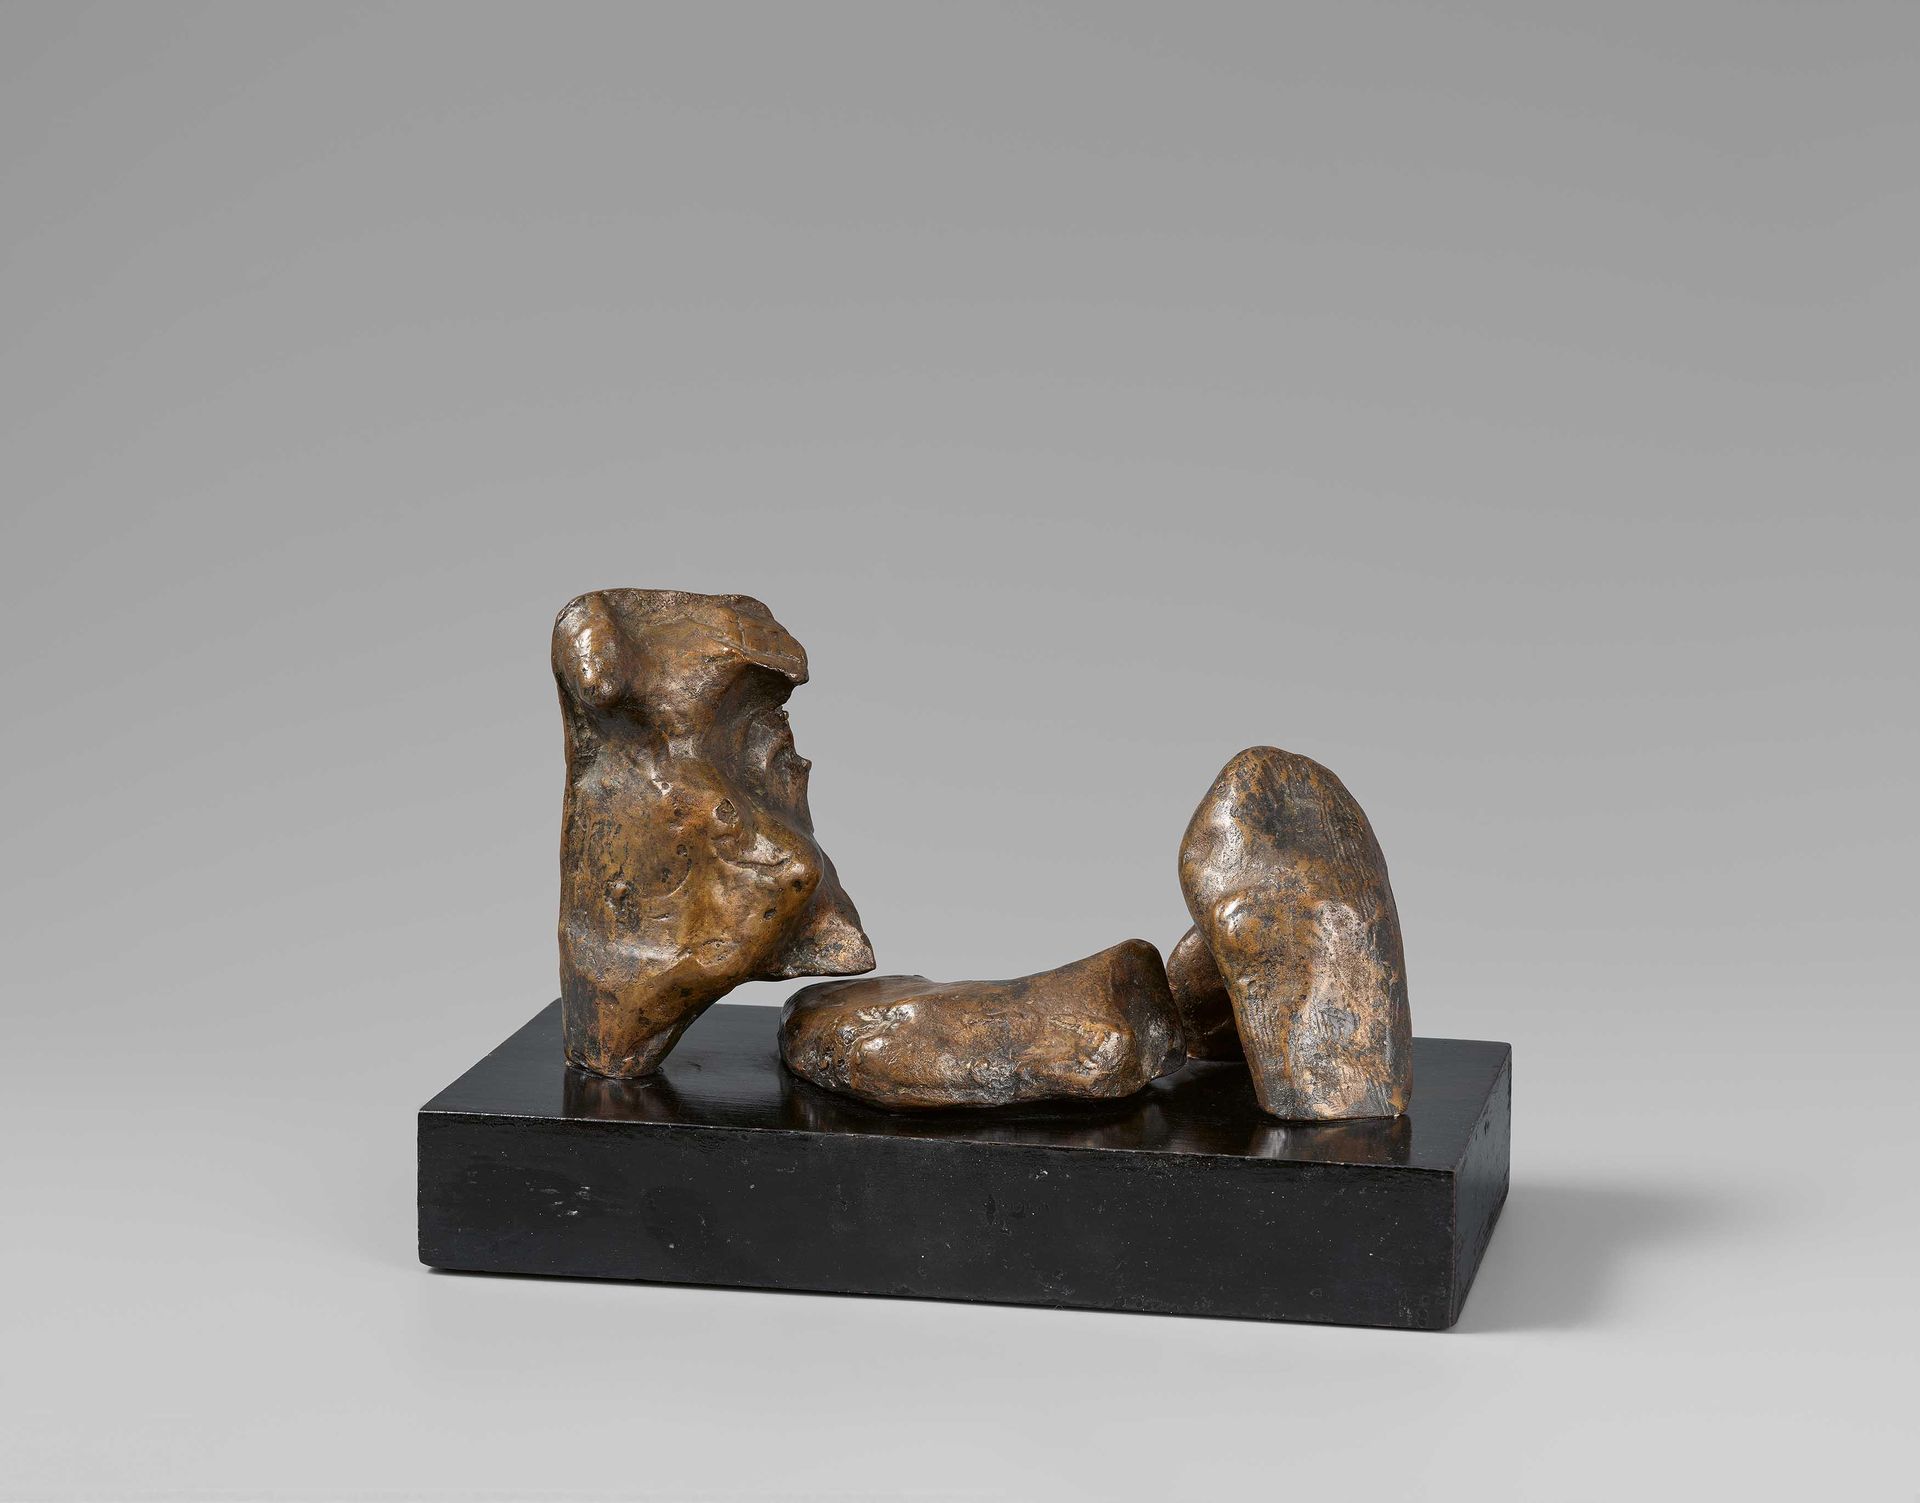 Henry Moore MOORE, HENRY
1898 Castleford/Yorkshire - 1986 Much Hadham

Titre : F&hellip;